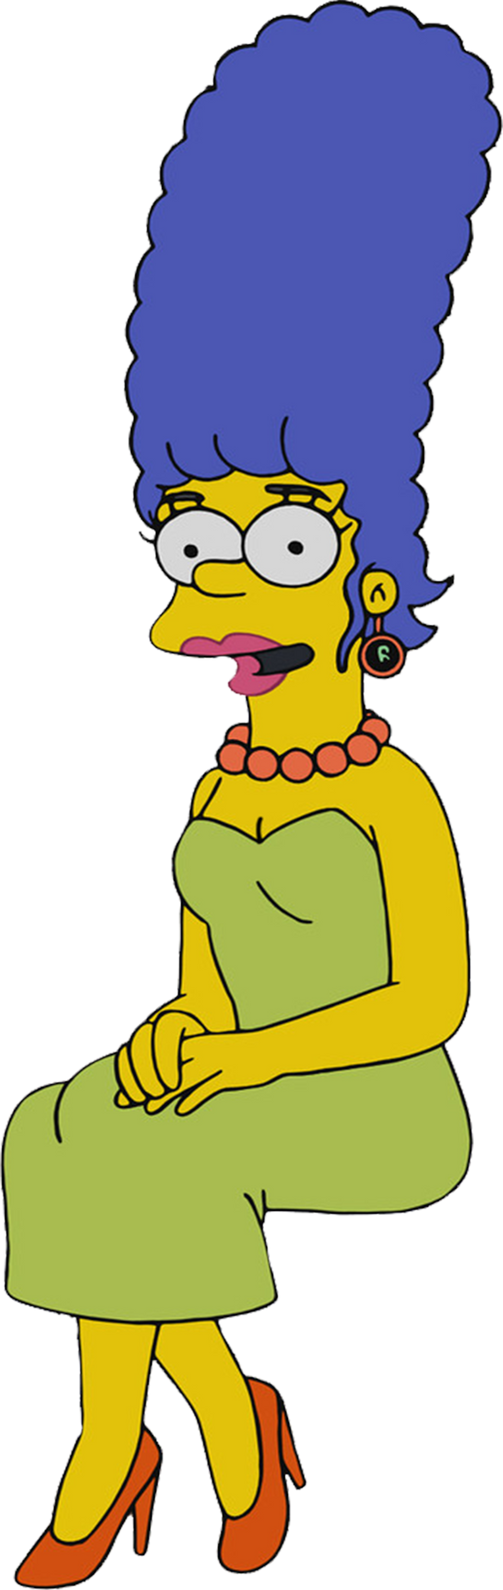 Marge Simpson Vector 14 By Homersimpson1983 On Deviantart 